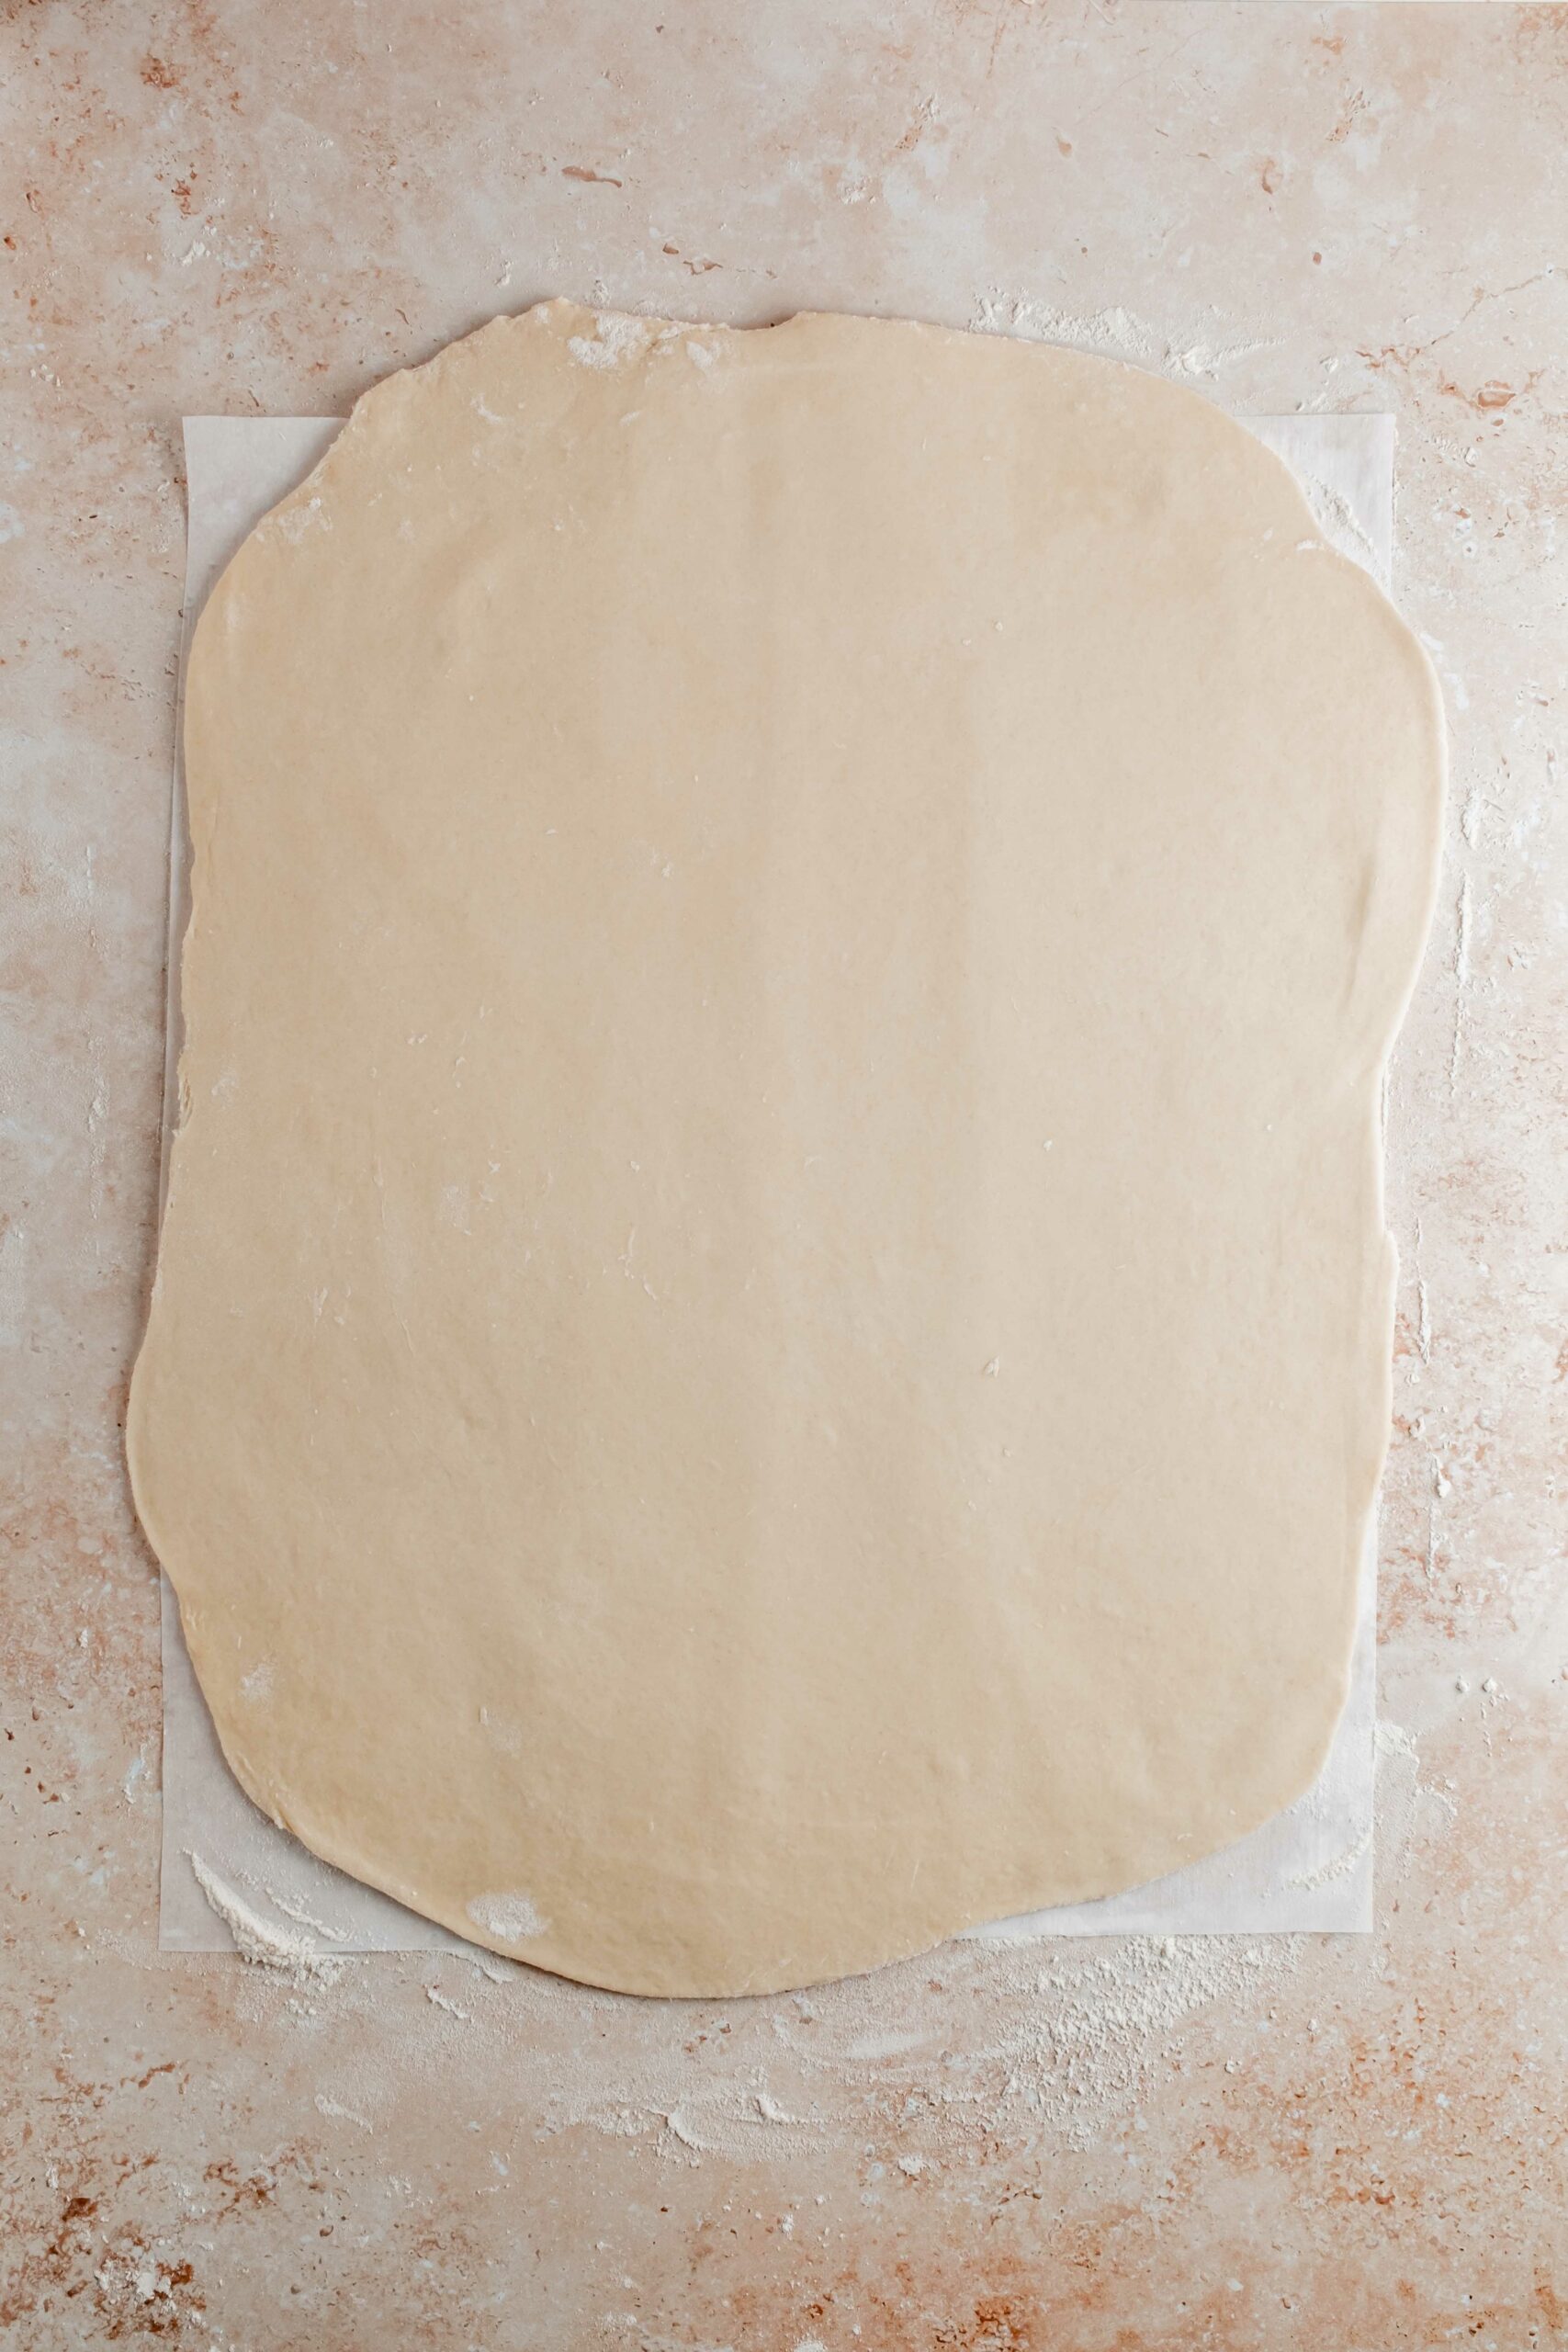 dough rolled out into thin layer